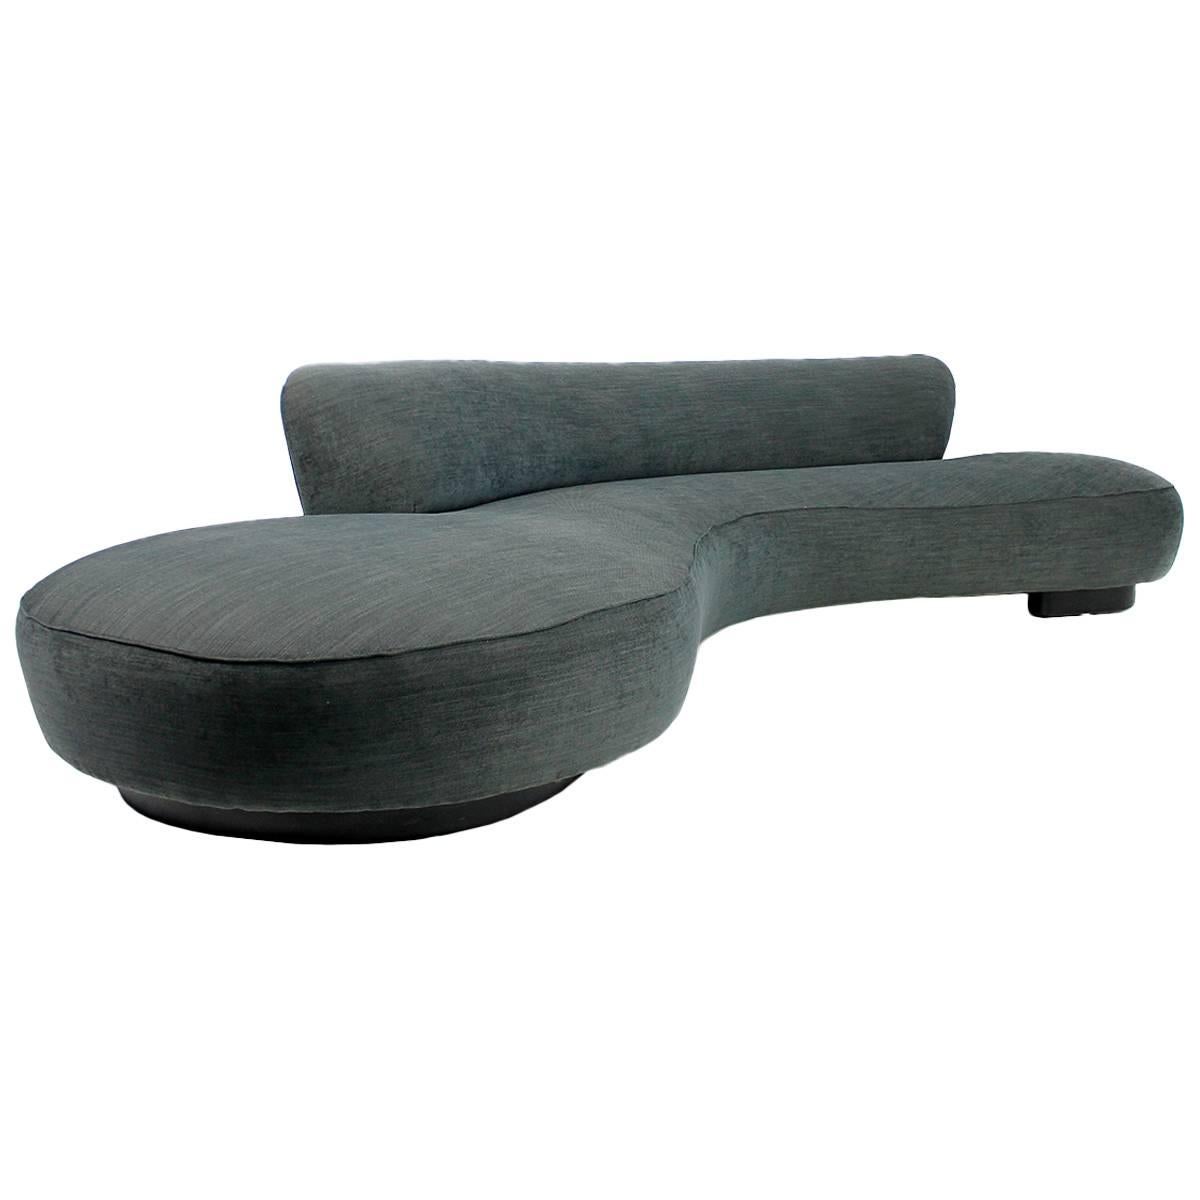 Very large serpentine sofa by Vladimir Kagan for Directional. The sofa is in a very good condition, it was covered in 2014 with high quality smooth woven fabric, of course free standing, upholstery in best condition. The legs were covered with black